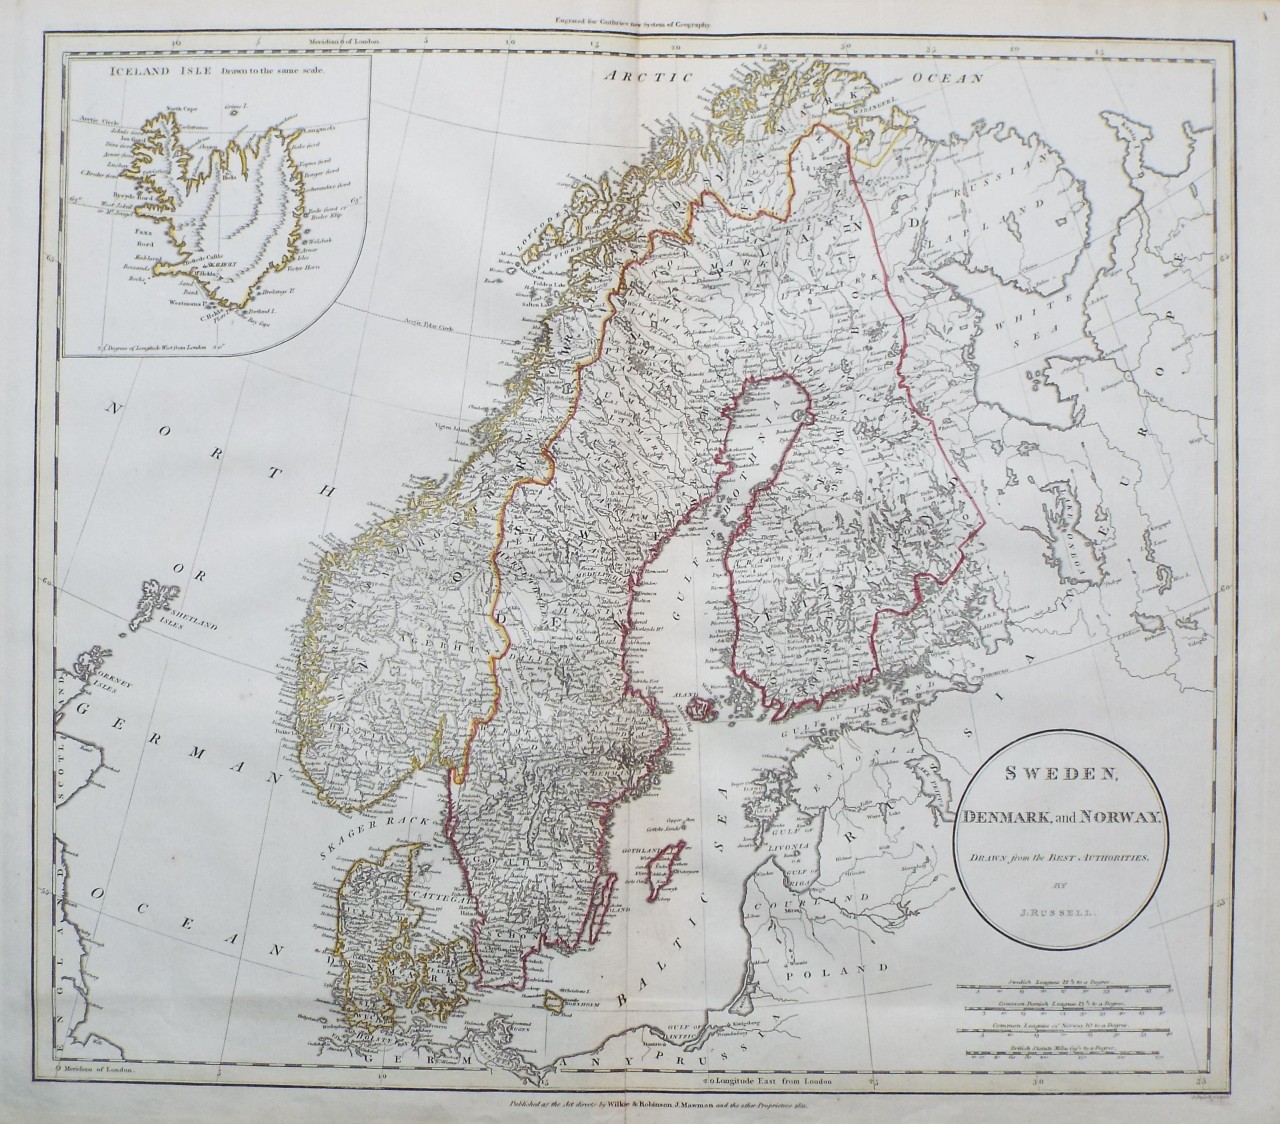 Map of Sweden, Denmark and Norway